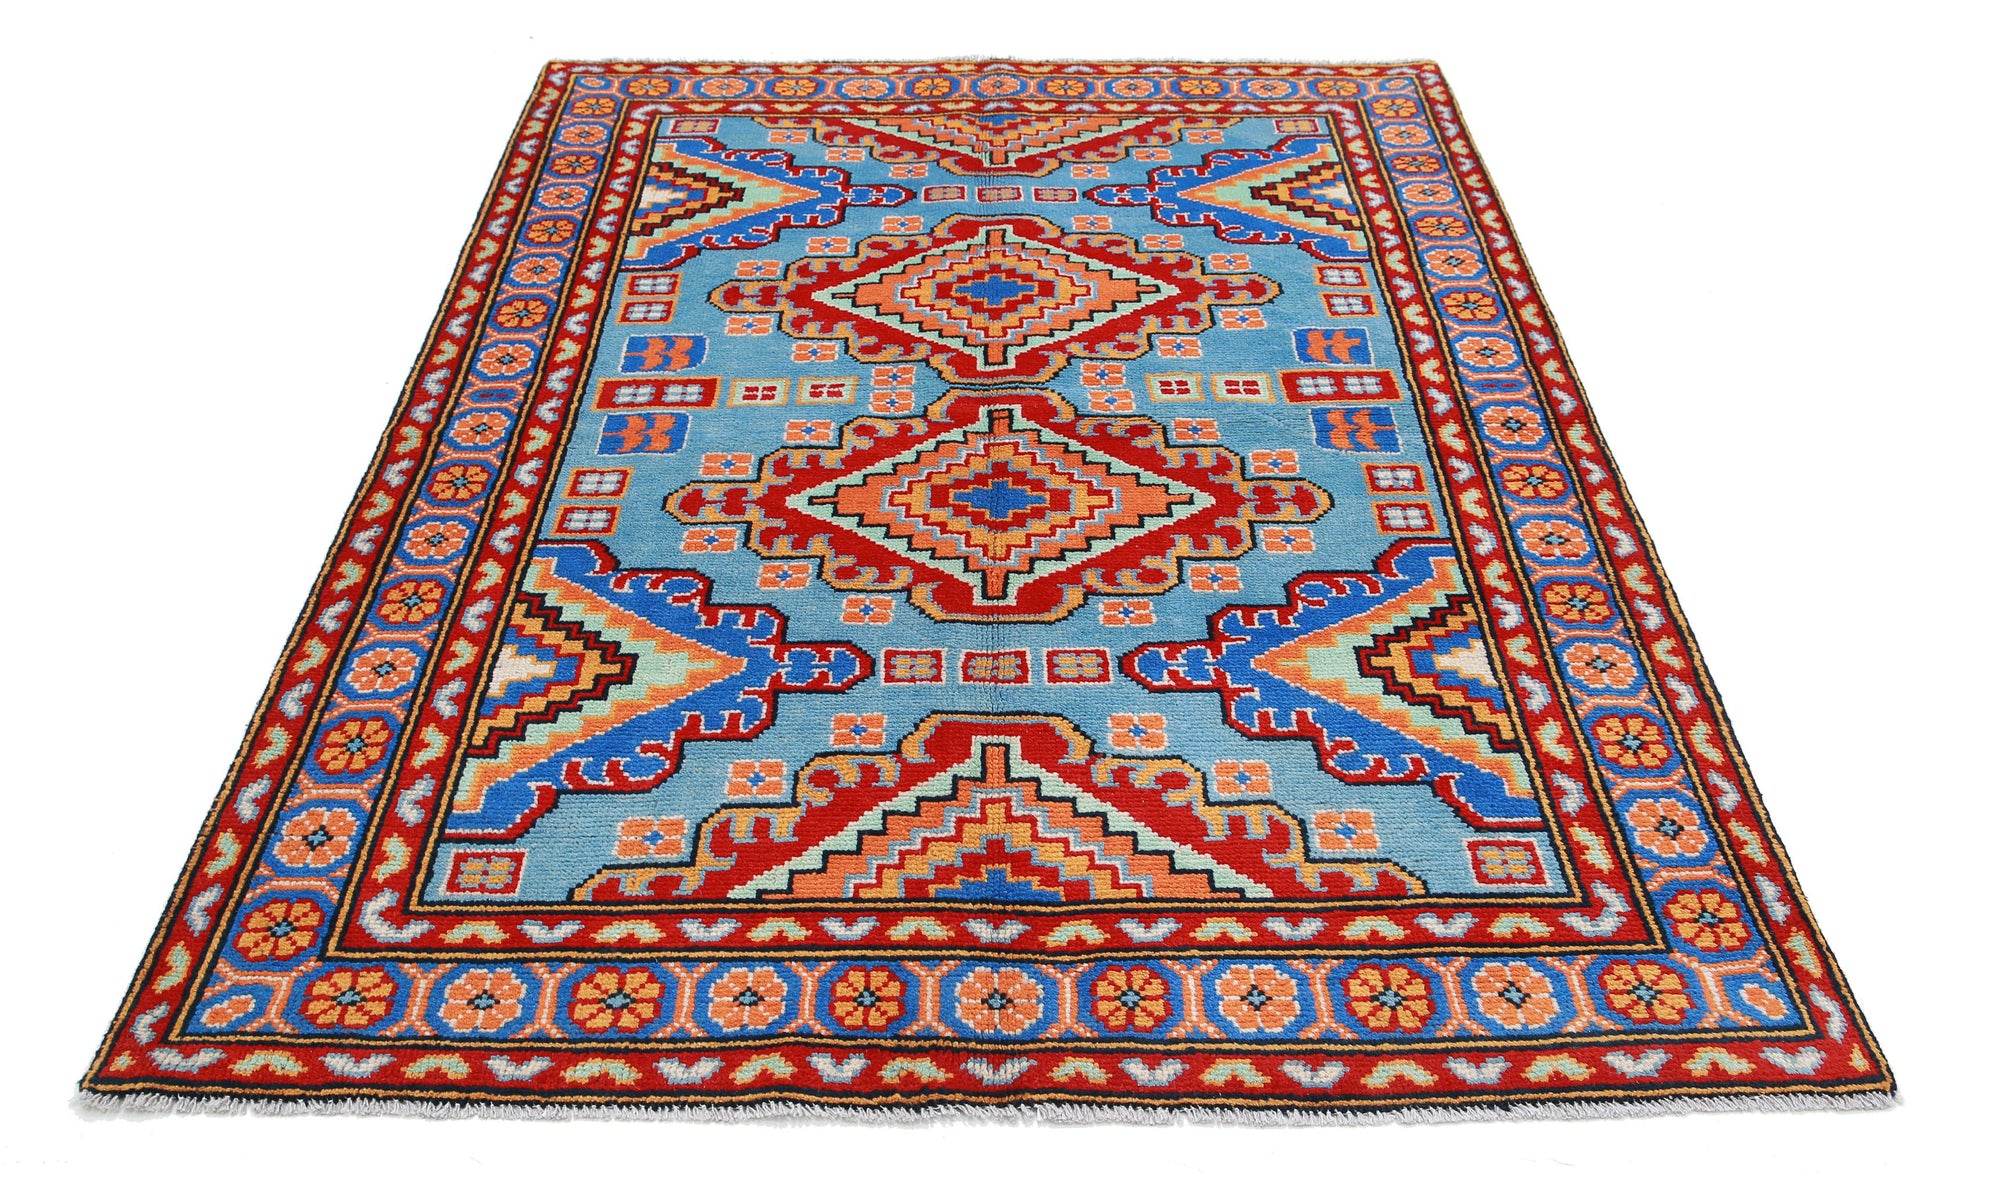 Revival-hand-knotted-qarghani-wool-rug-5014216-3.jpg